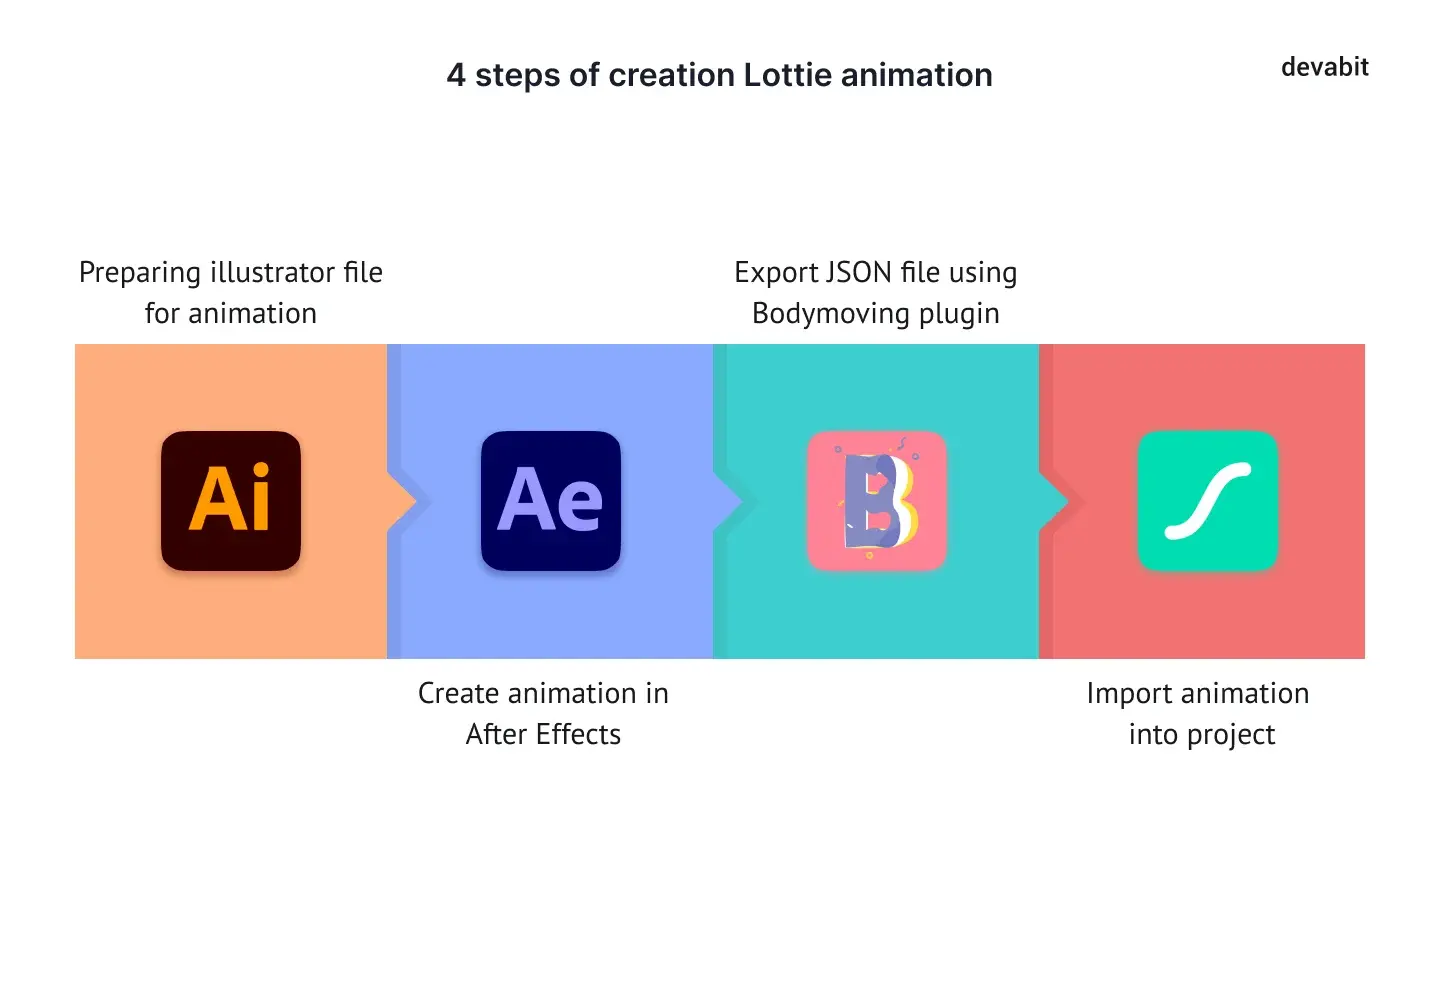 How to Create Lottie Animations: A Step-by-Step Guide